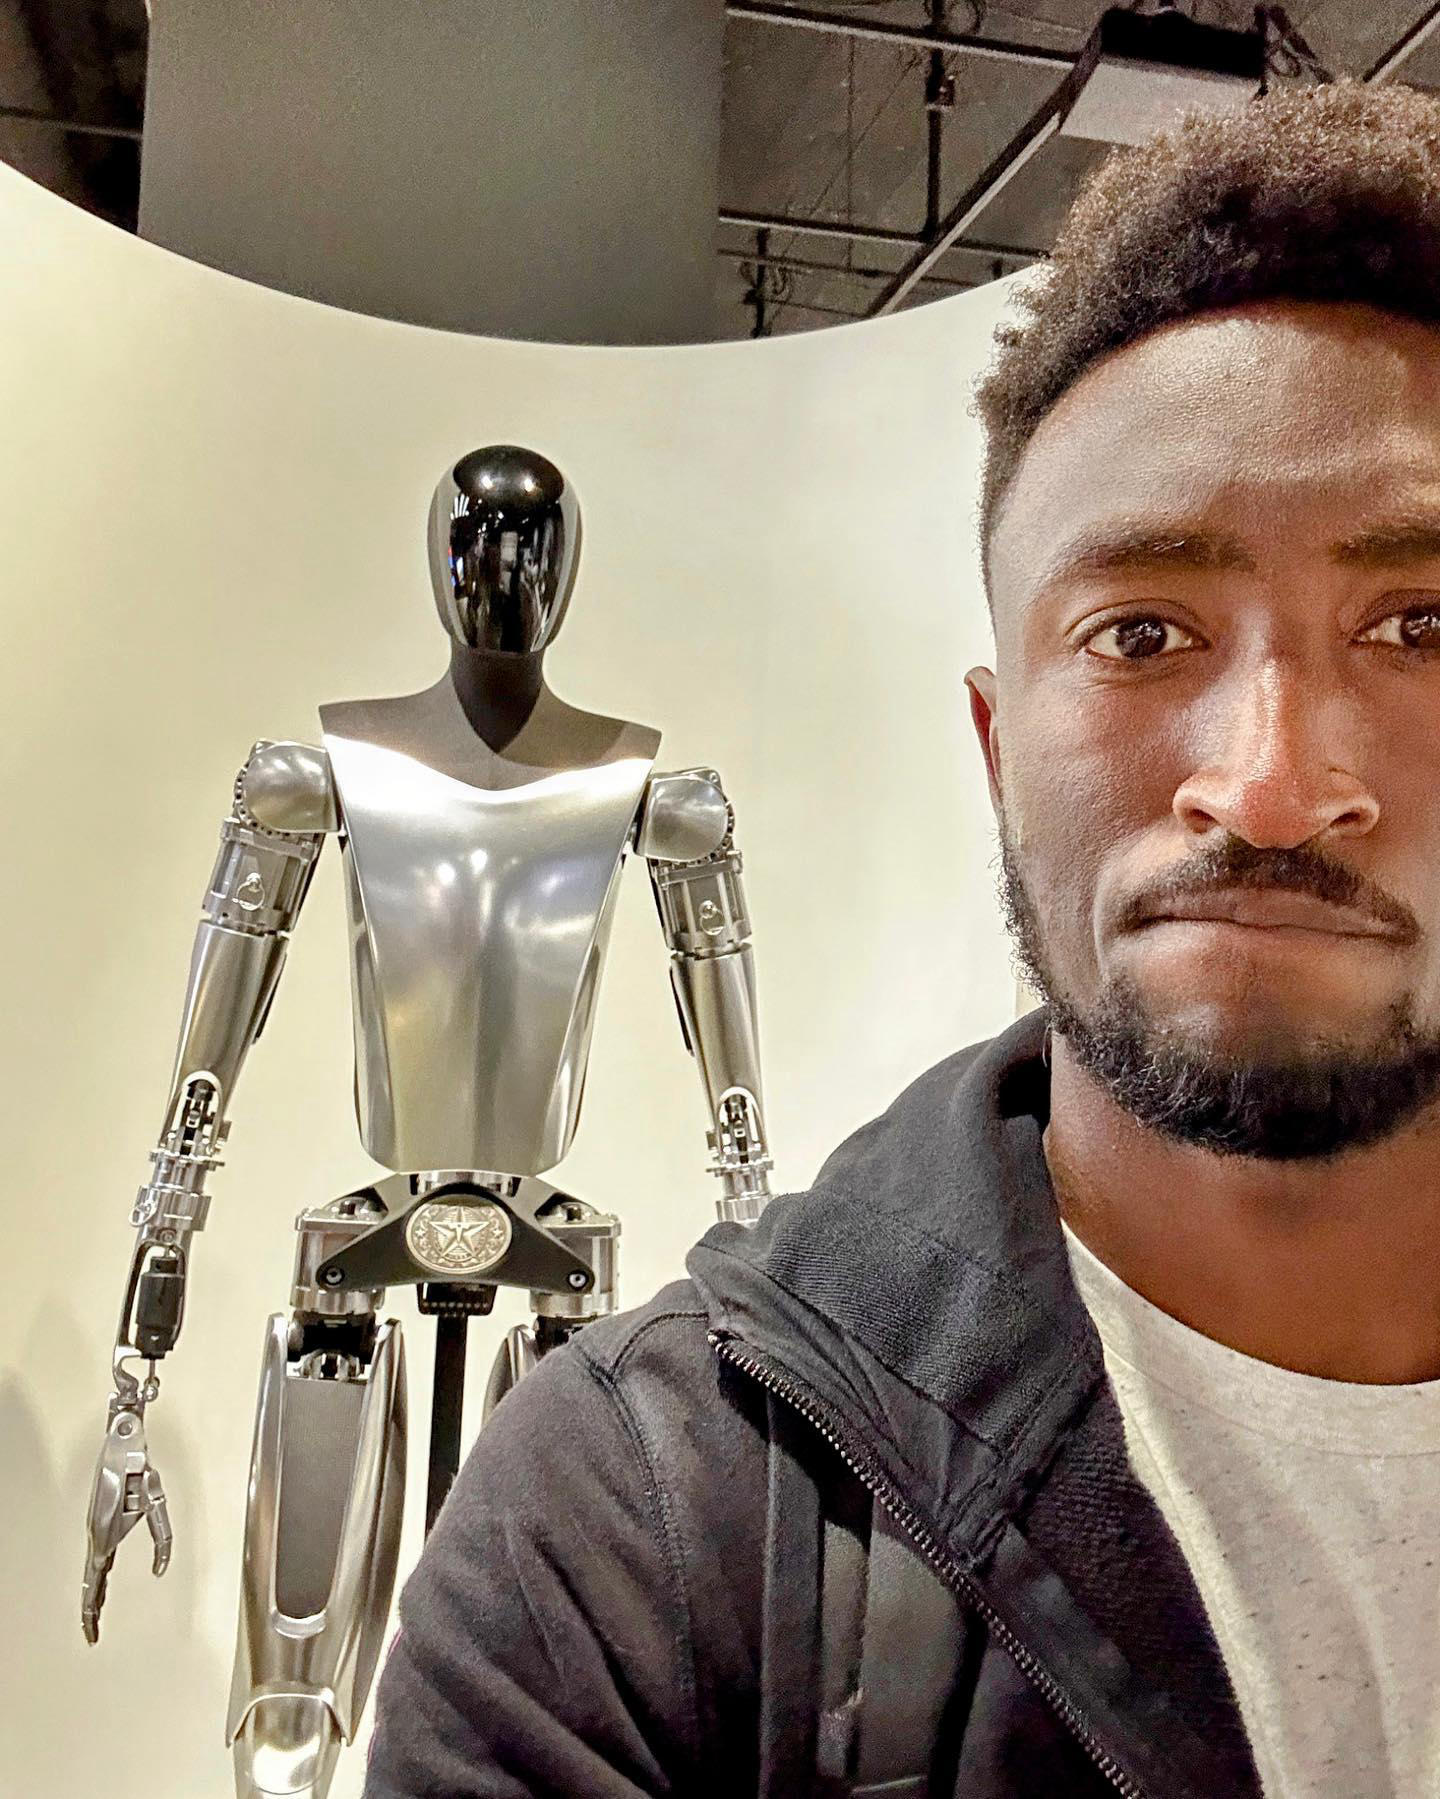 Marques Brownlee - I'm still in camp humanoid robots are silly and hoping someone can change my mi